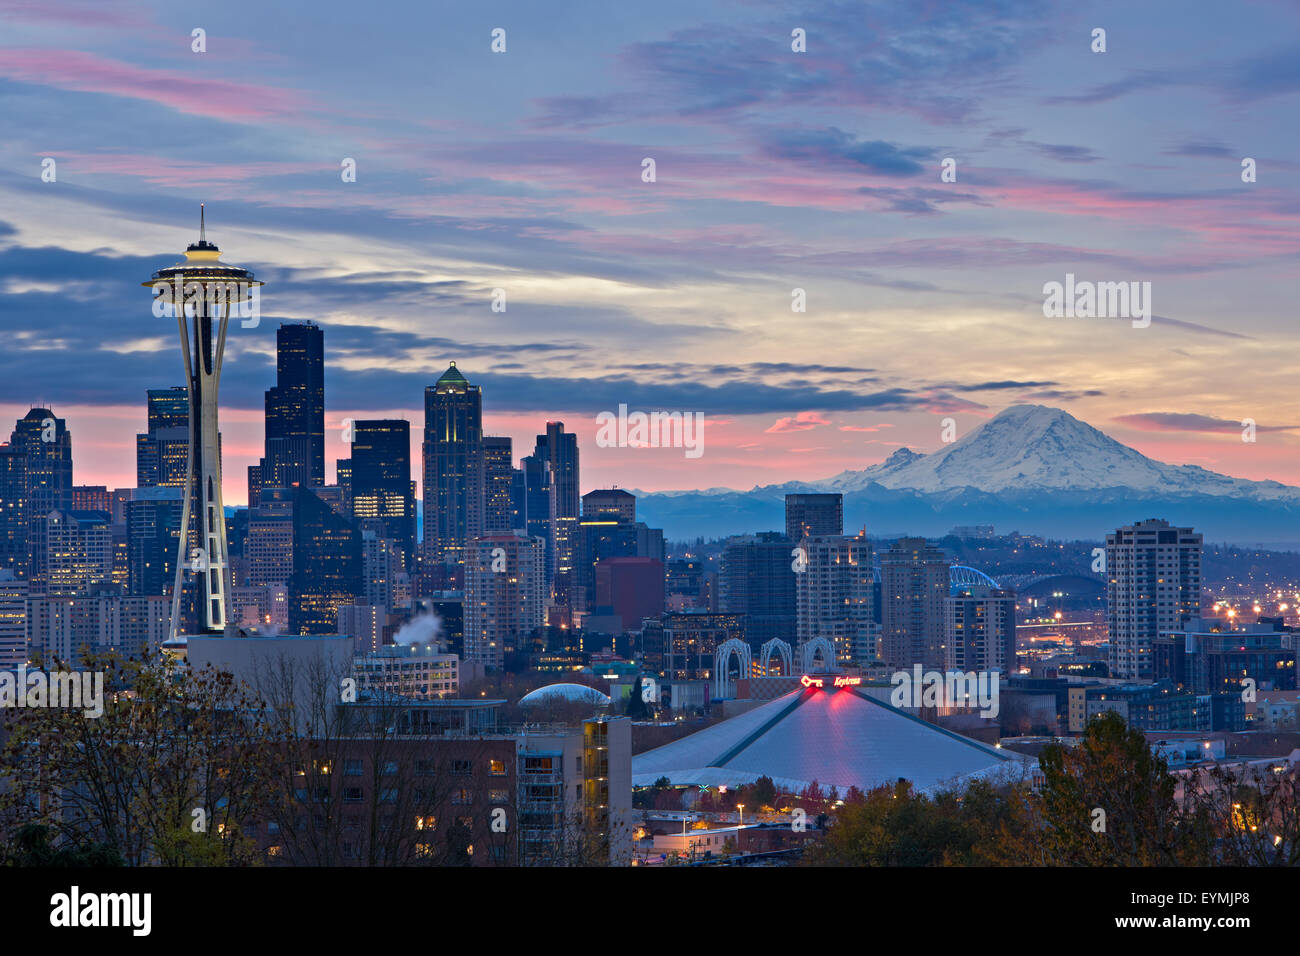 Seattle skyline at twilight with clouds, Mount Rainier in the background, Washington State, USA Stock Photo